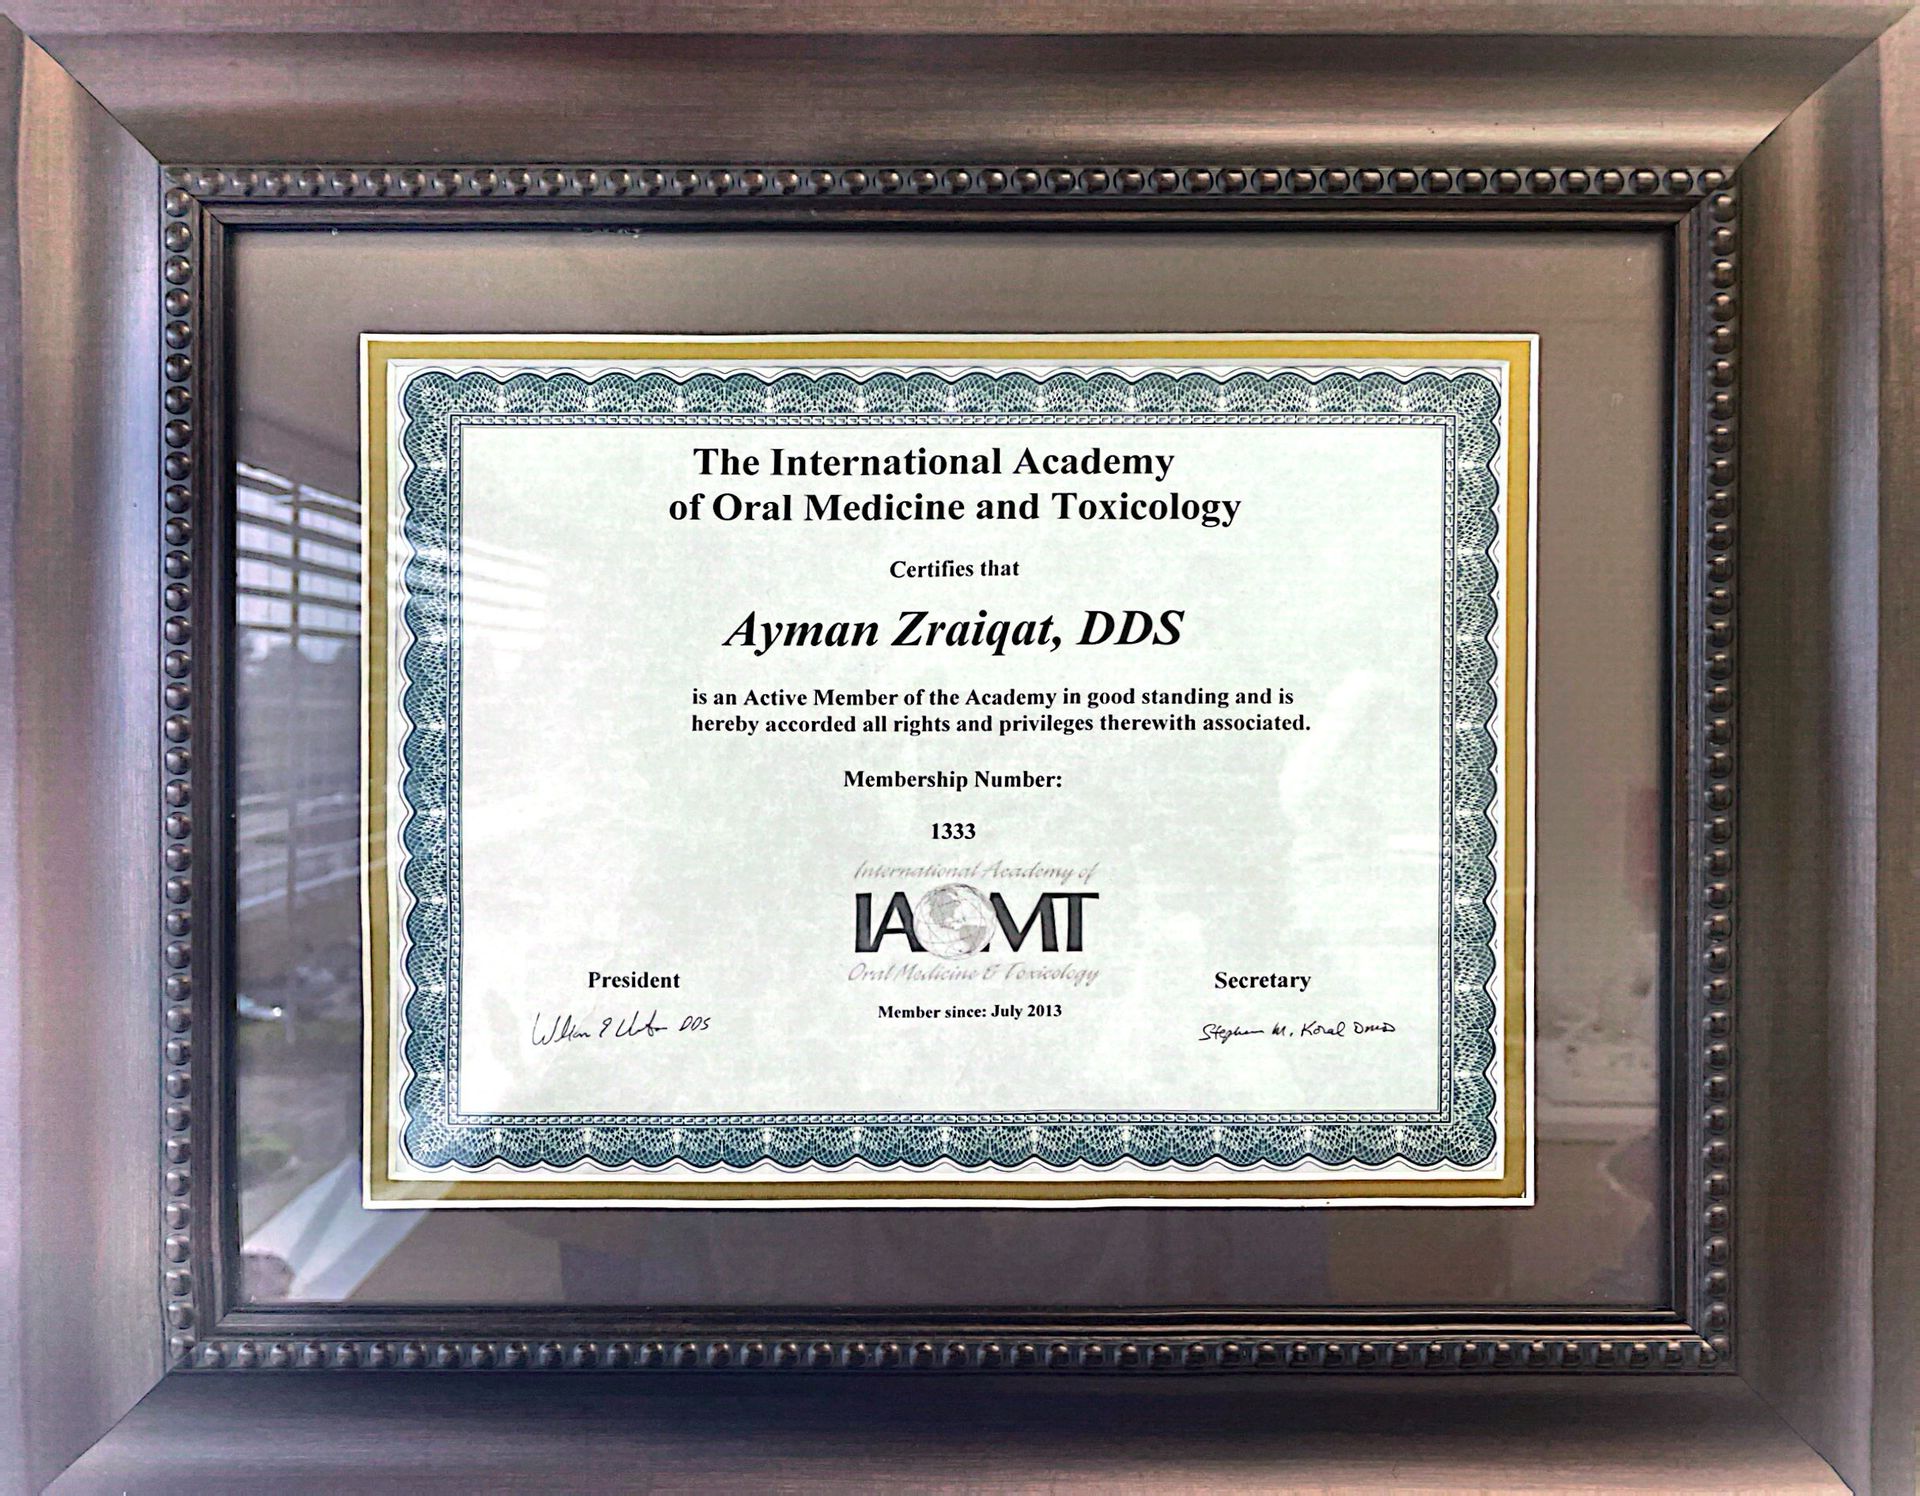 A framed certificate from the International Academy of Oral Medicine and Toxicology, certifying Ayman Zraiqat, DDS, as an active member.